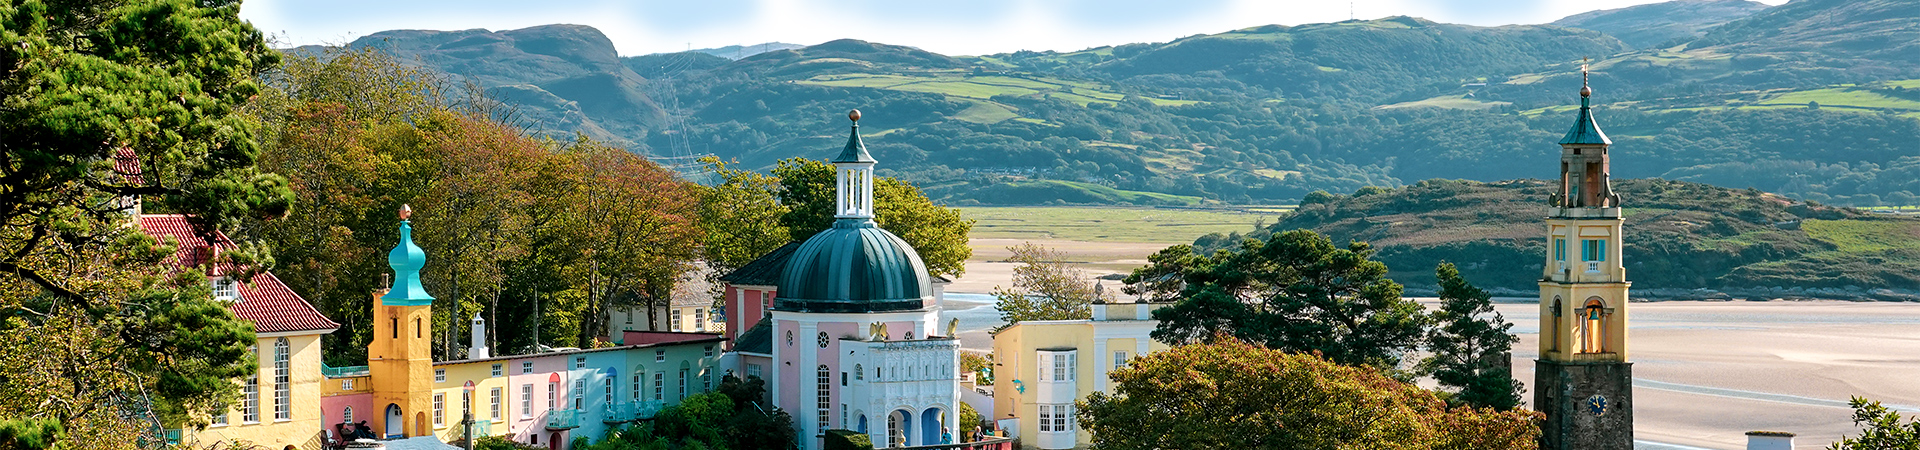 Self-catering holiday in North Wales